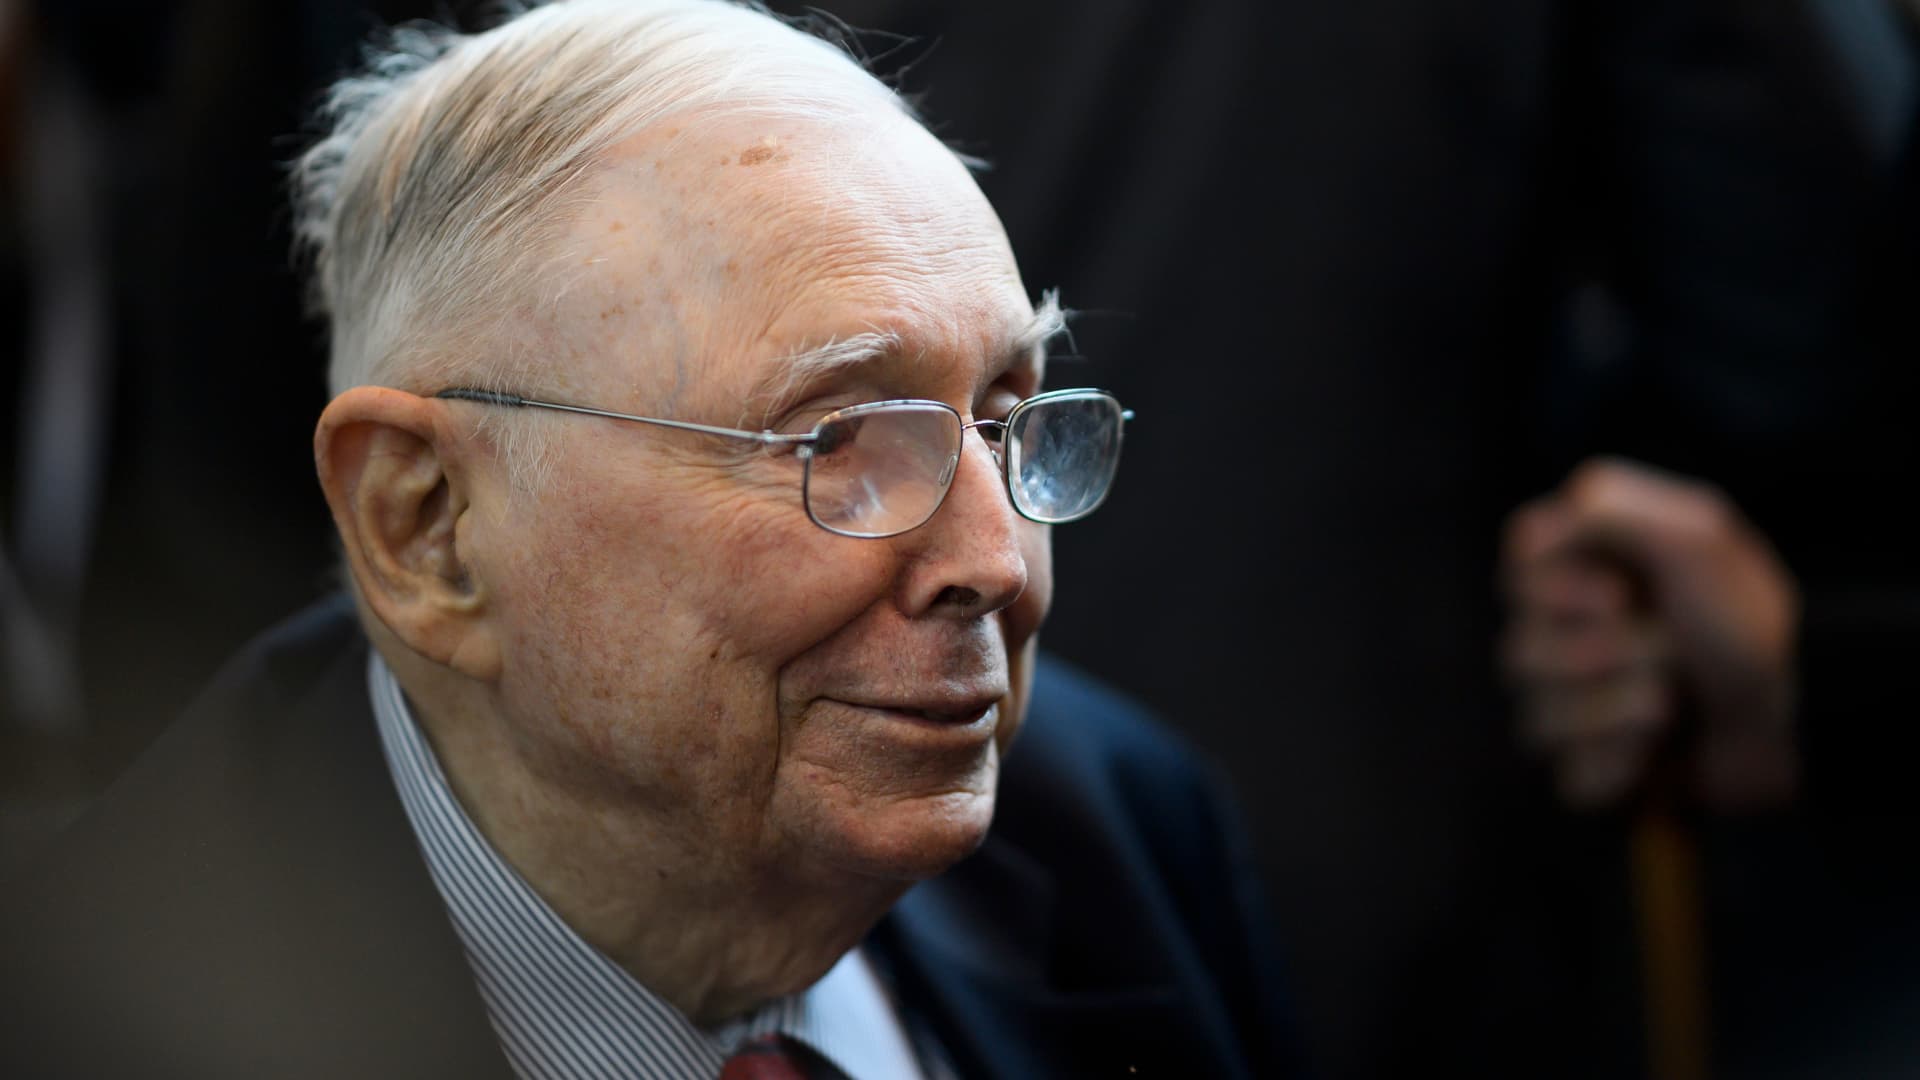 Munger and Buffett were unable to pull off one last deal together using Berkshire’s $157 billion in cash